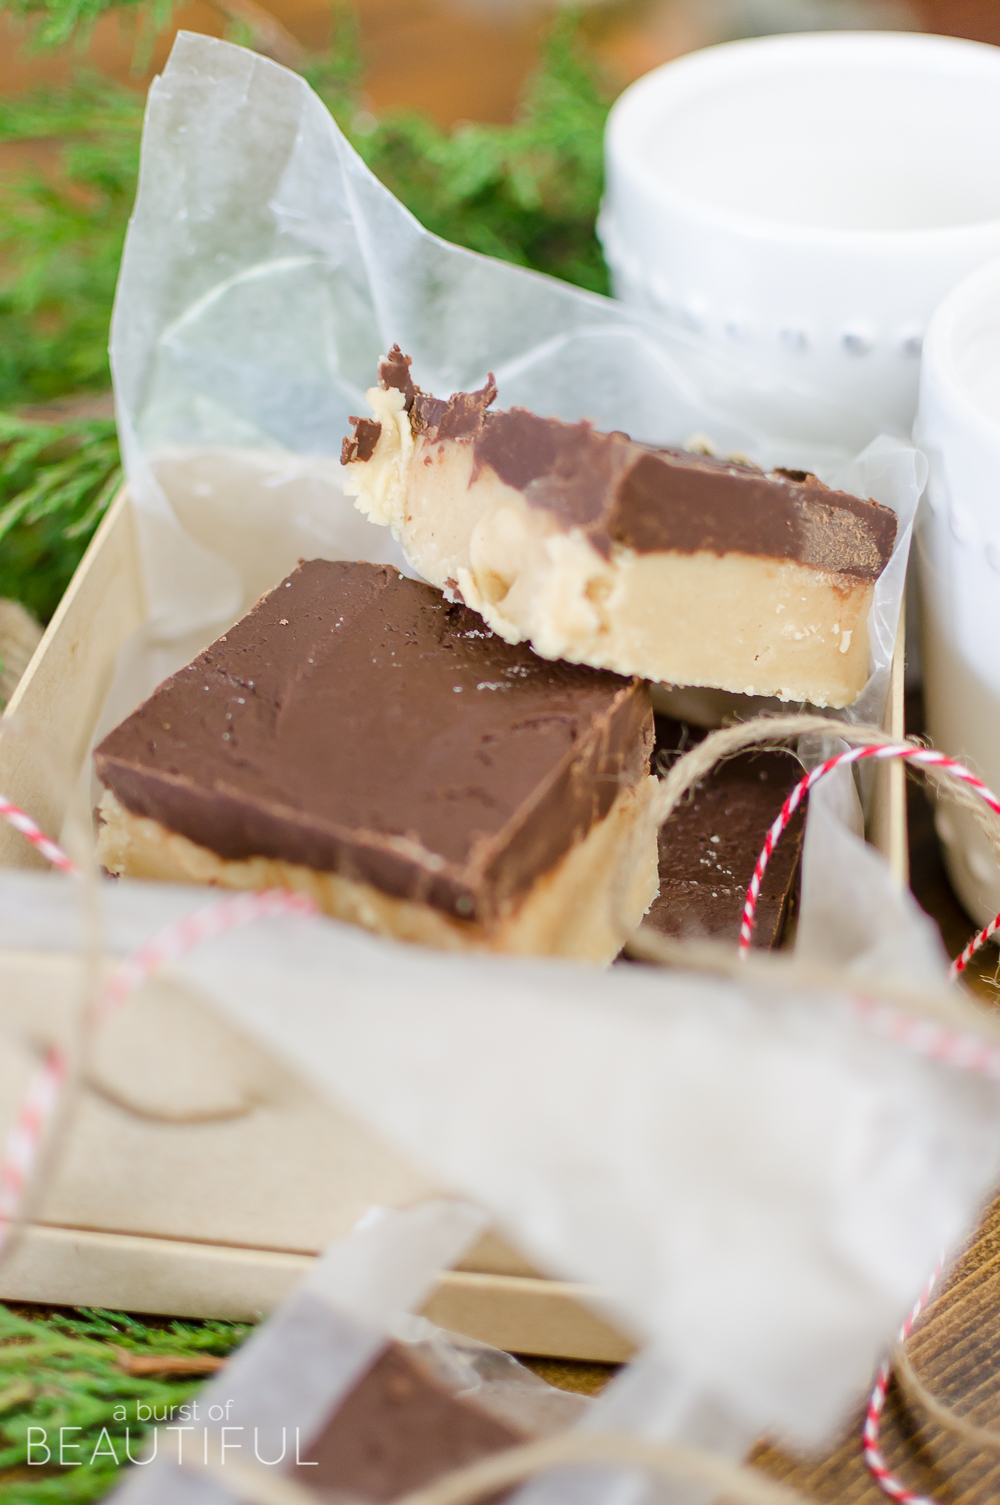 This rich and creamy Chocolate Peanut Butter Fudge will melt in your mouth. Wrap it up as a thoughtful and sweet holiday gift this year. 